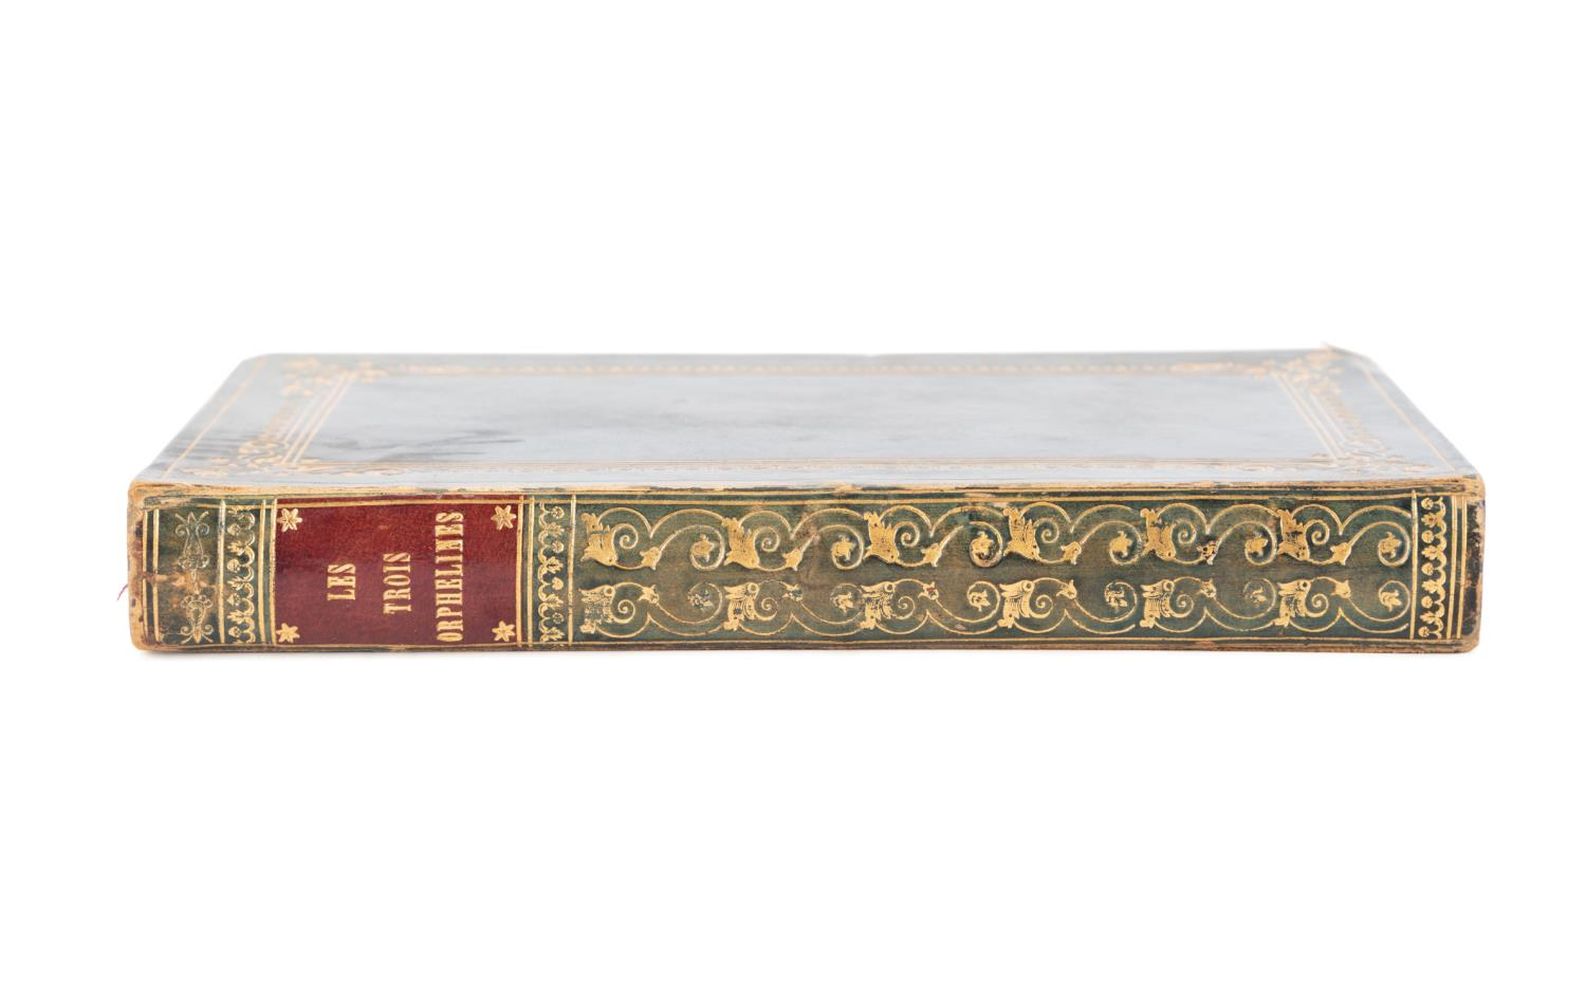 FORE-EDGE PAINTED BOOK, LES TROIS